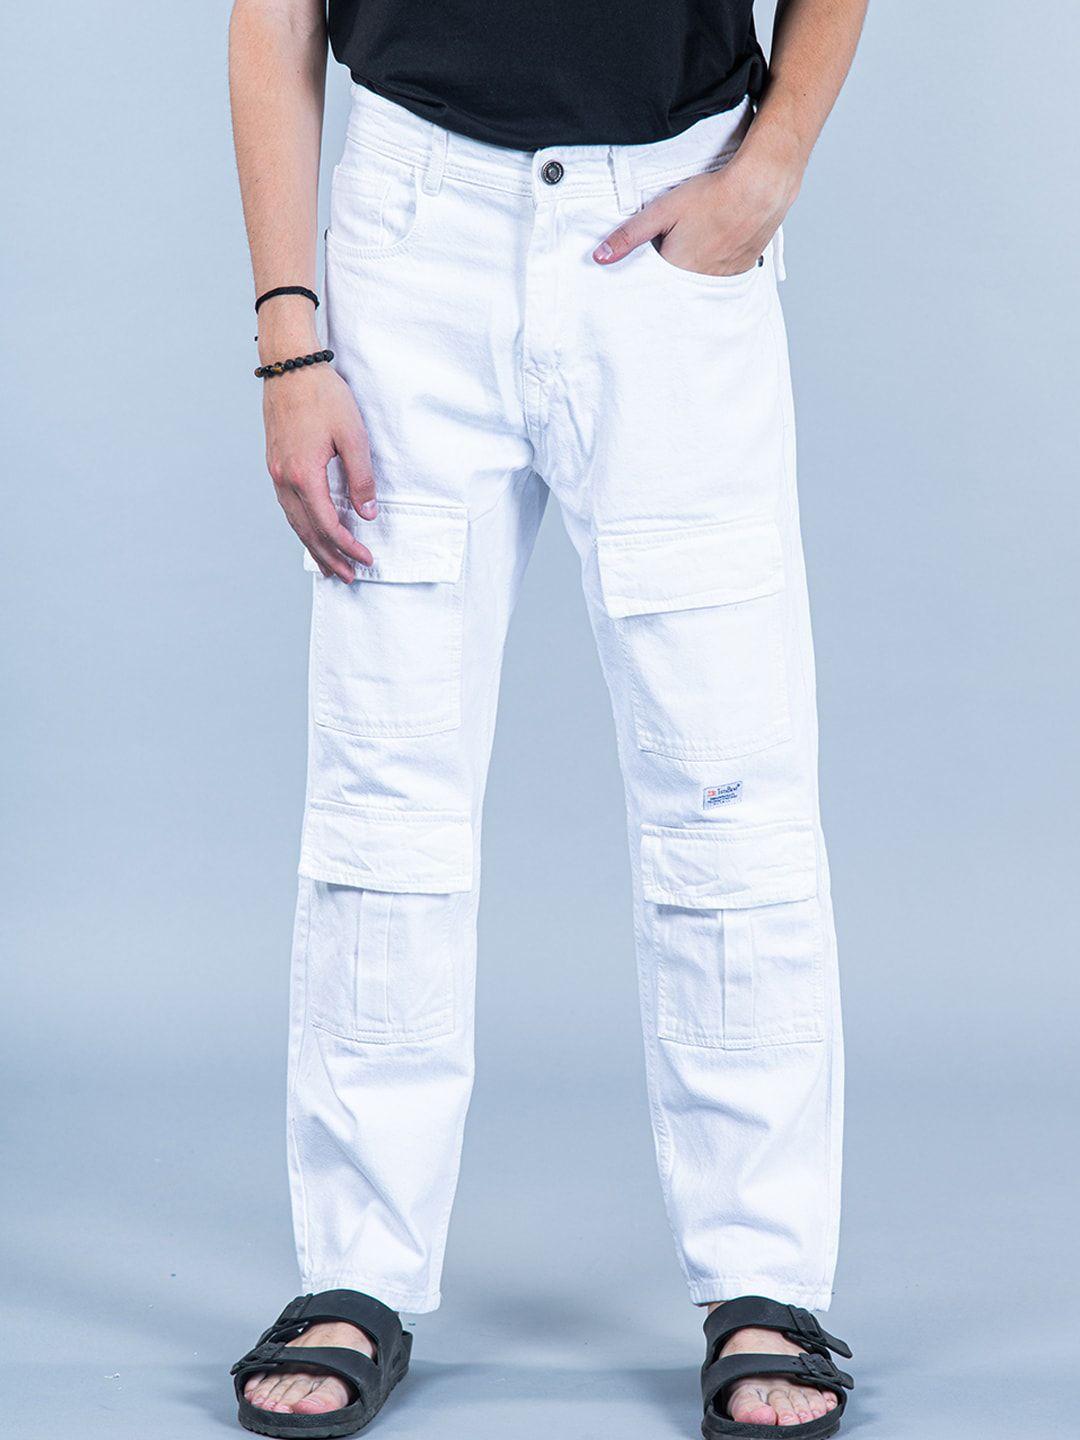 tistabene-men-comfort-relaxed-fit-clean-look-cotton-jeans